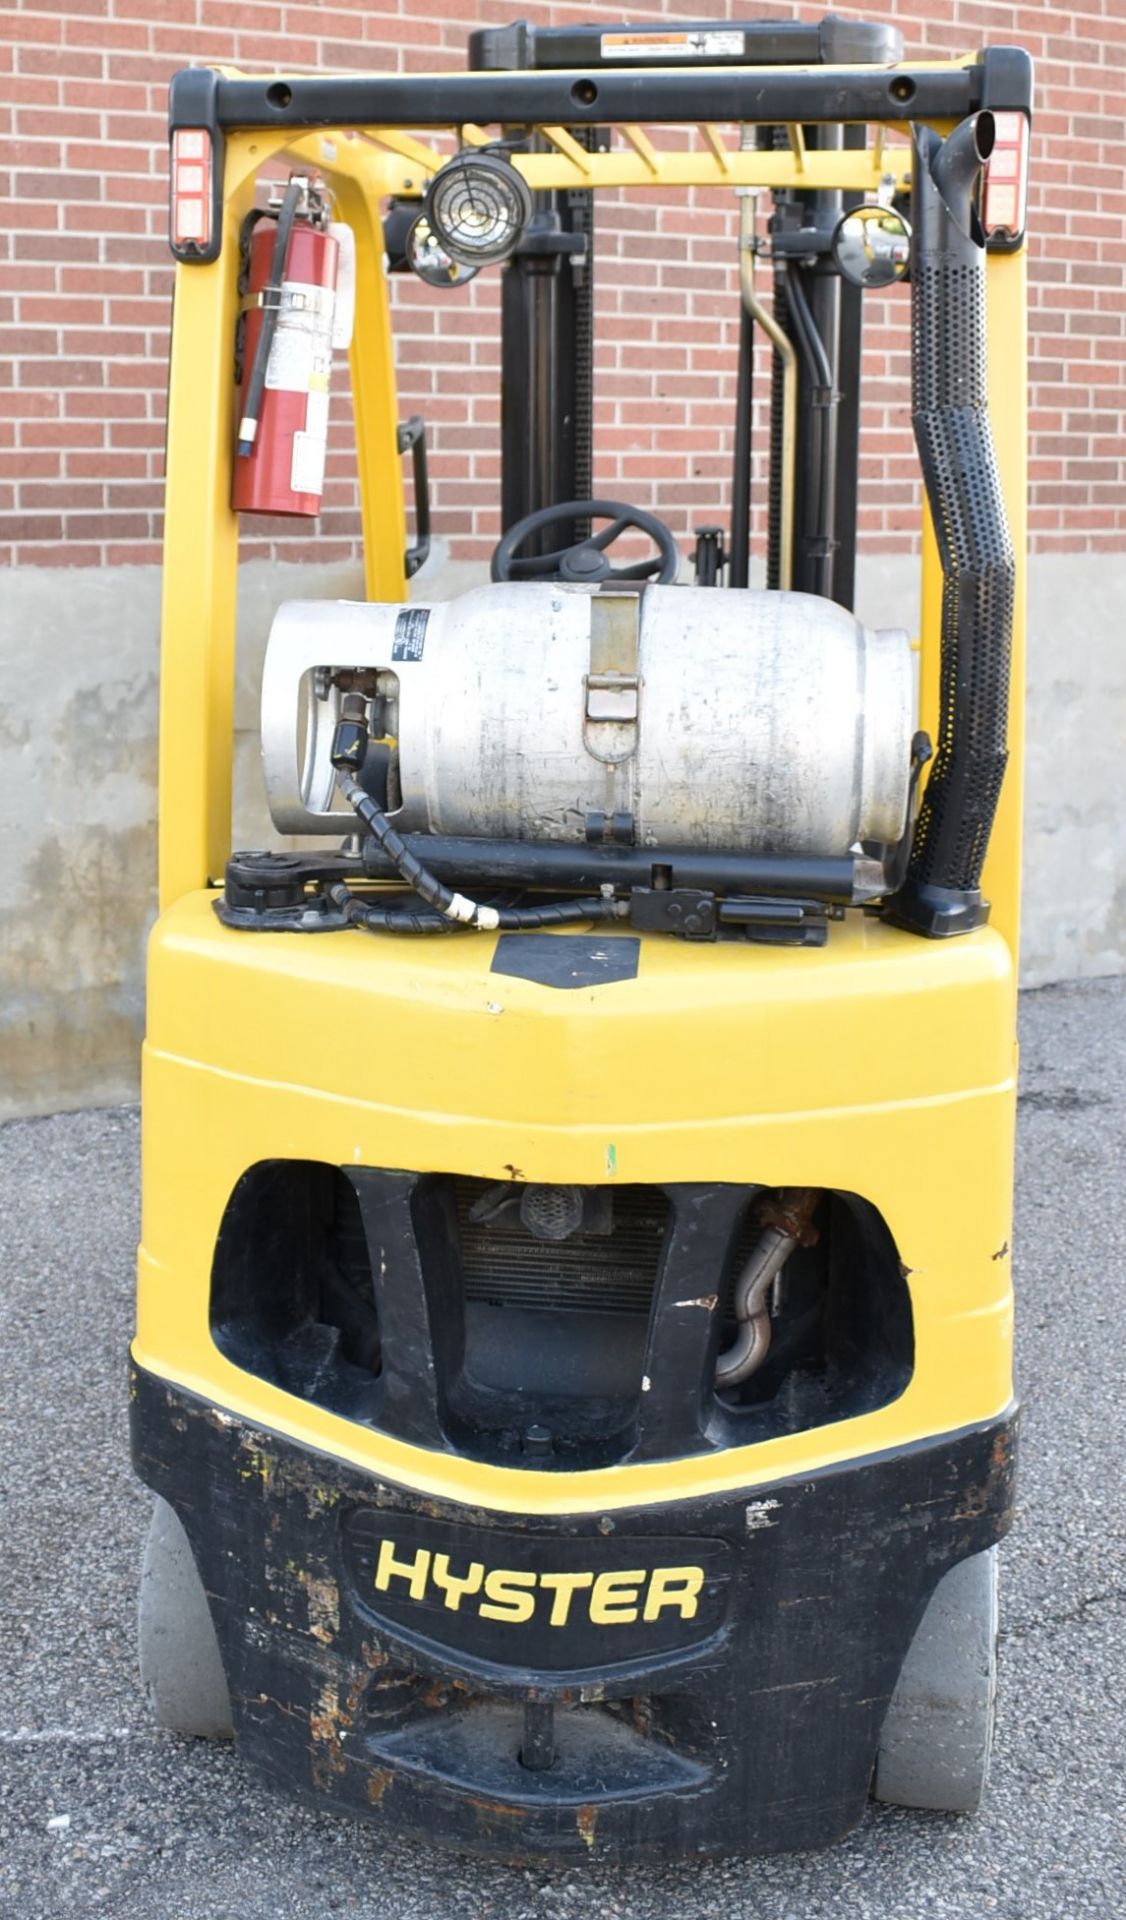 HYSTER S50FT 4,200 LB CAPACITY LPG FORKLIFT WITH 218.5" MAXIMUM LIFT HEIGHT, 3-STAGE MAST, SIDE - Image 5 of 10